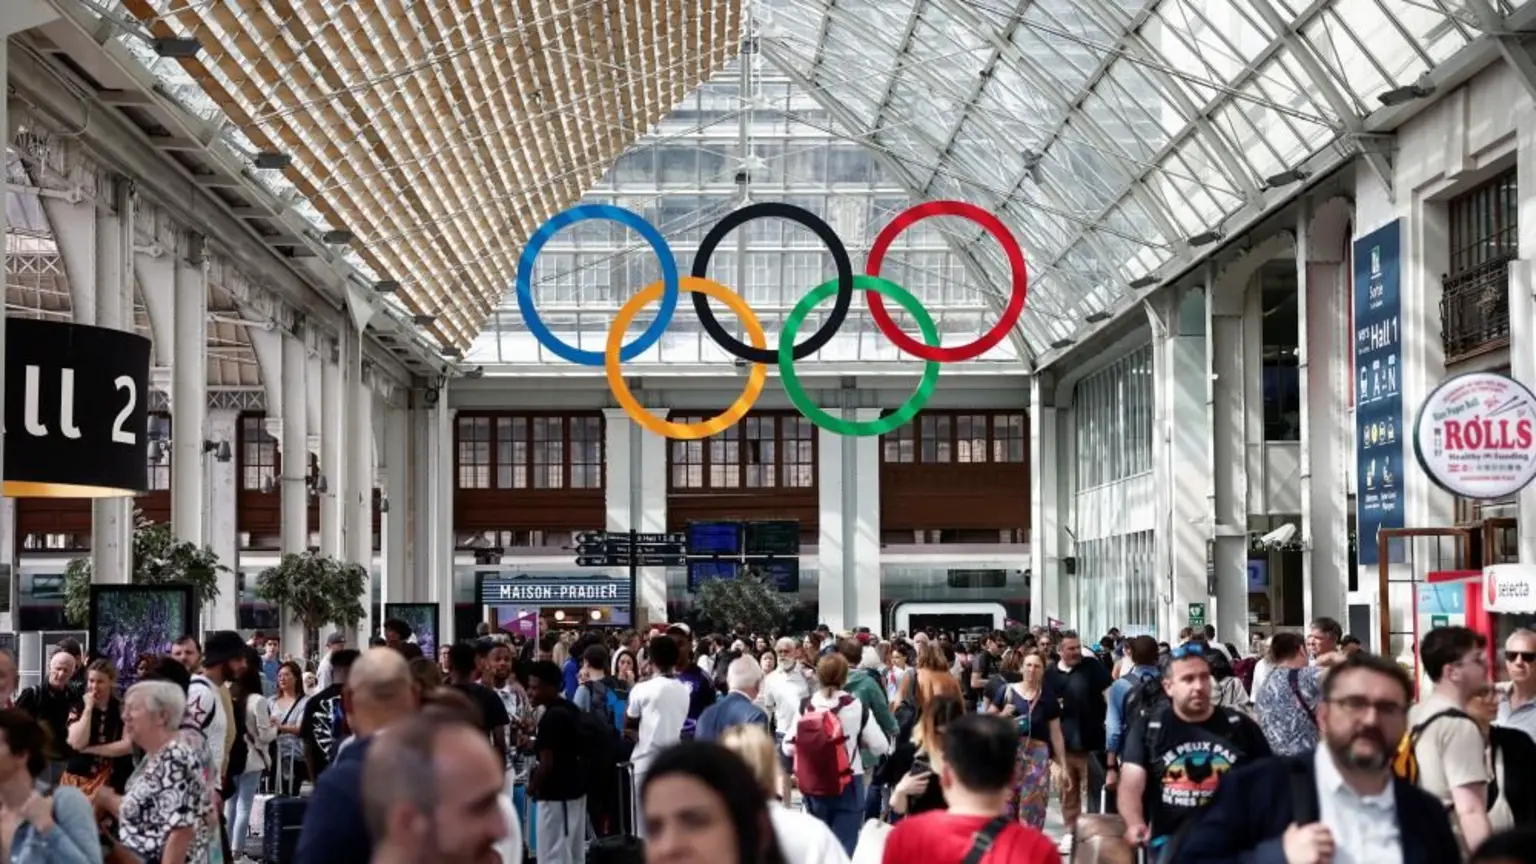 France’s Train Network Hit By Arson Attacks Hours Before Olympics Opening Ceremony